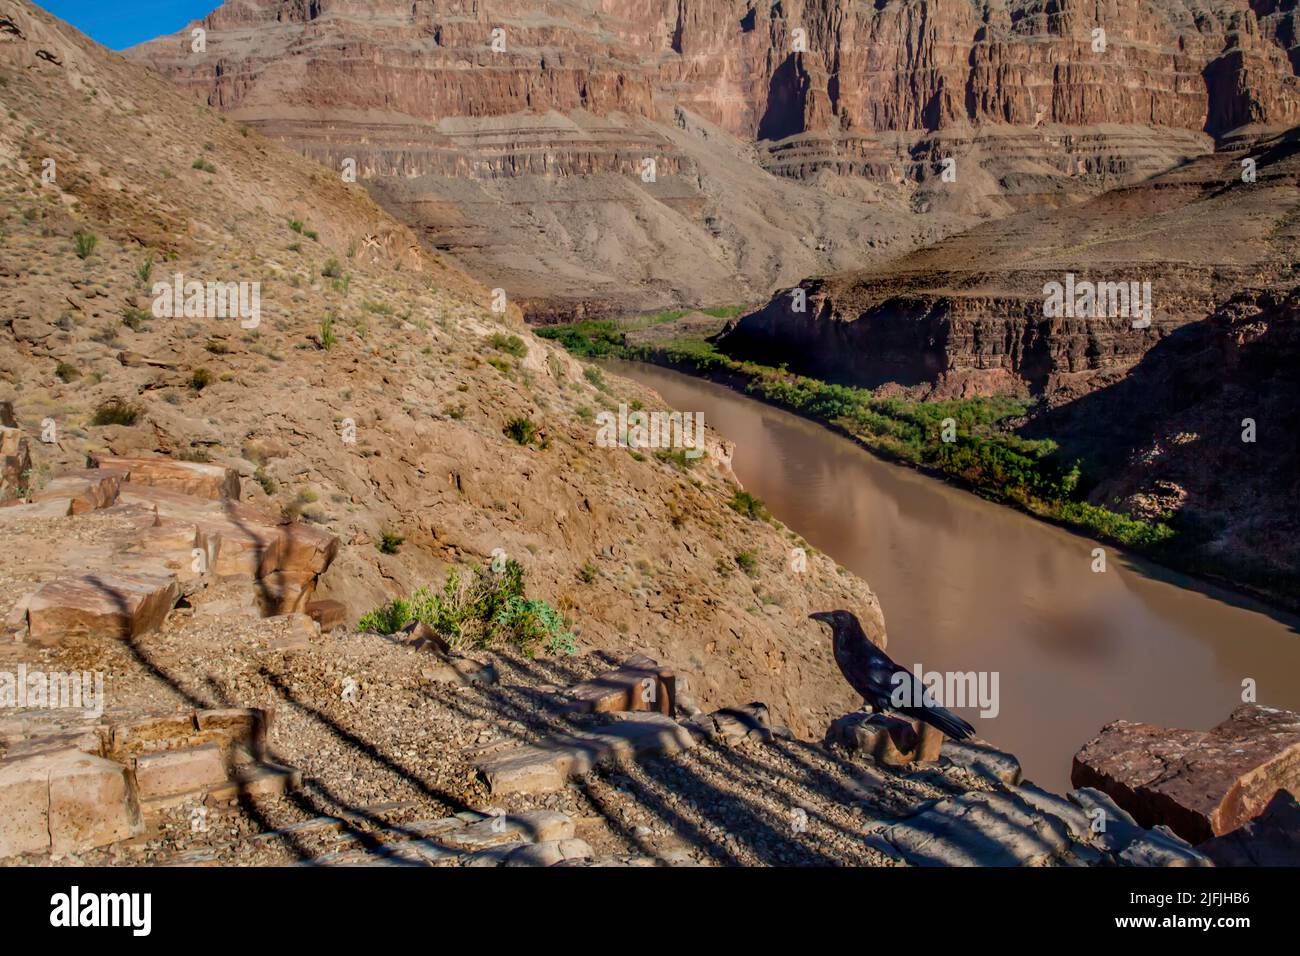 A black bird sits on the bank of the Colorado River in the Grand Canyon, USA Stock Photo